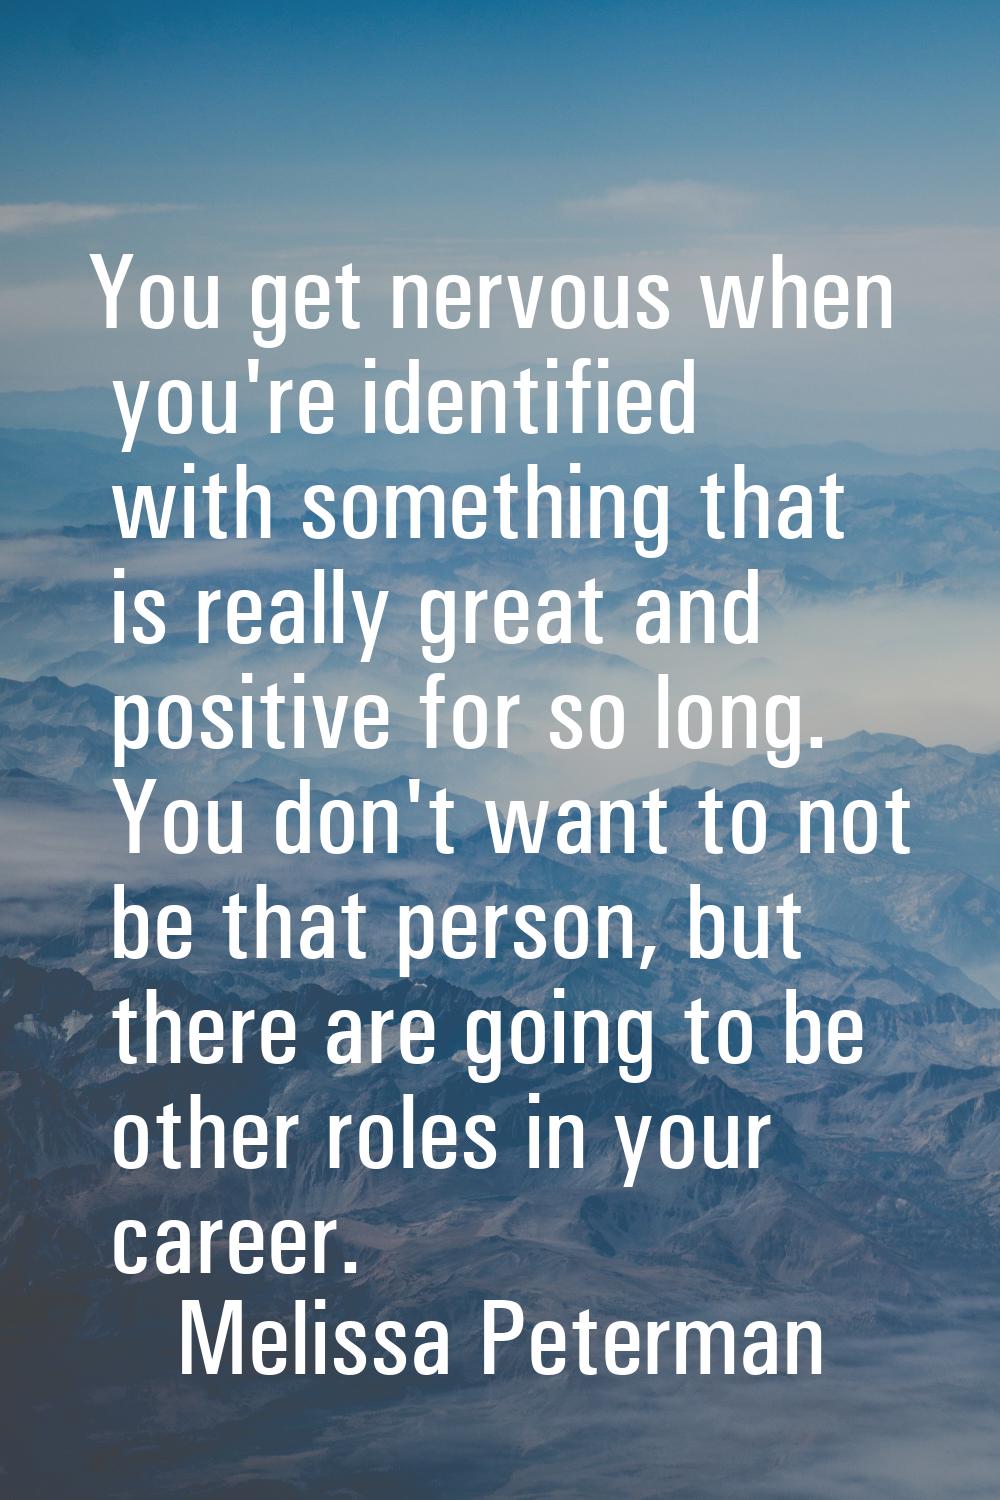 You get nervous when you're identified with something that is really great and positive for so long